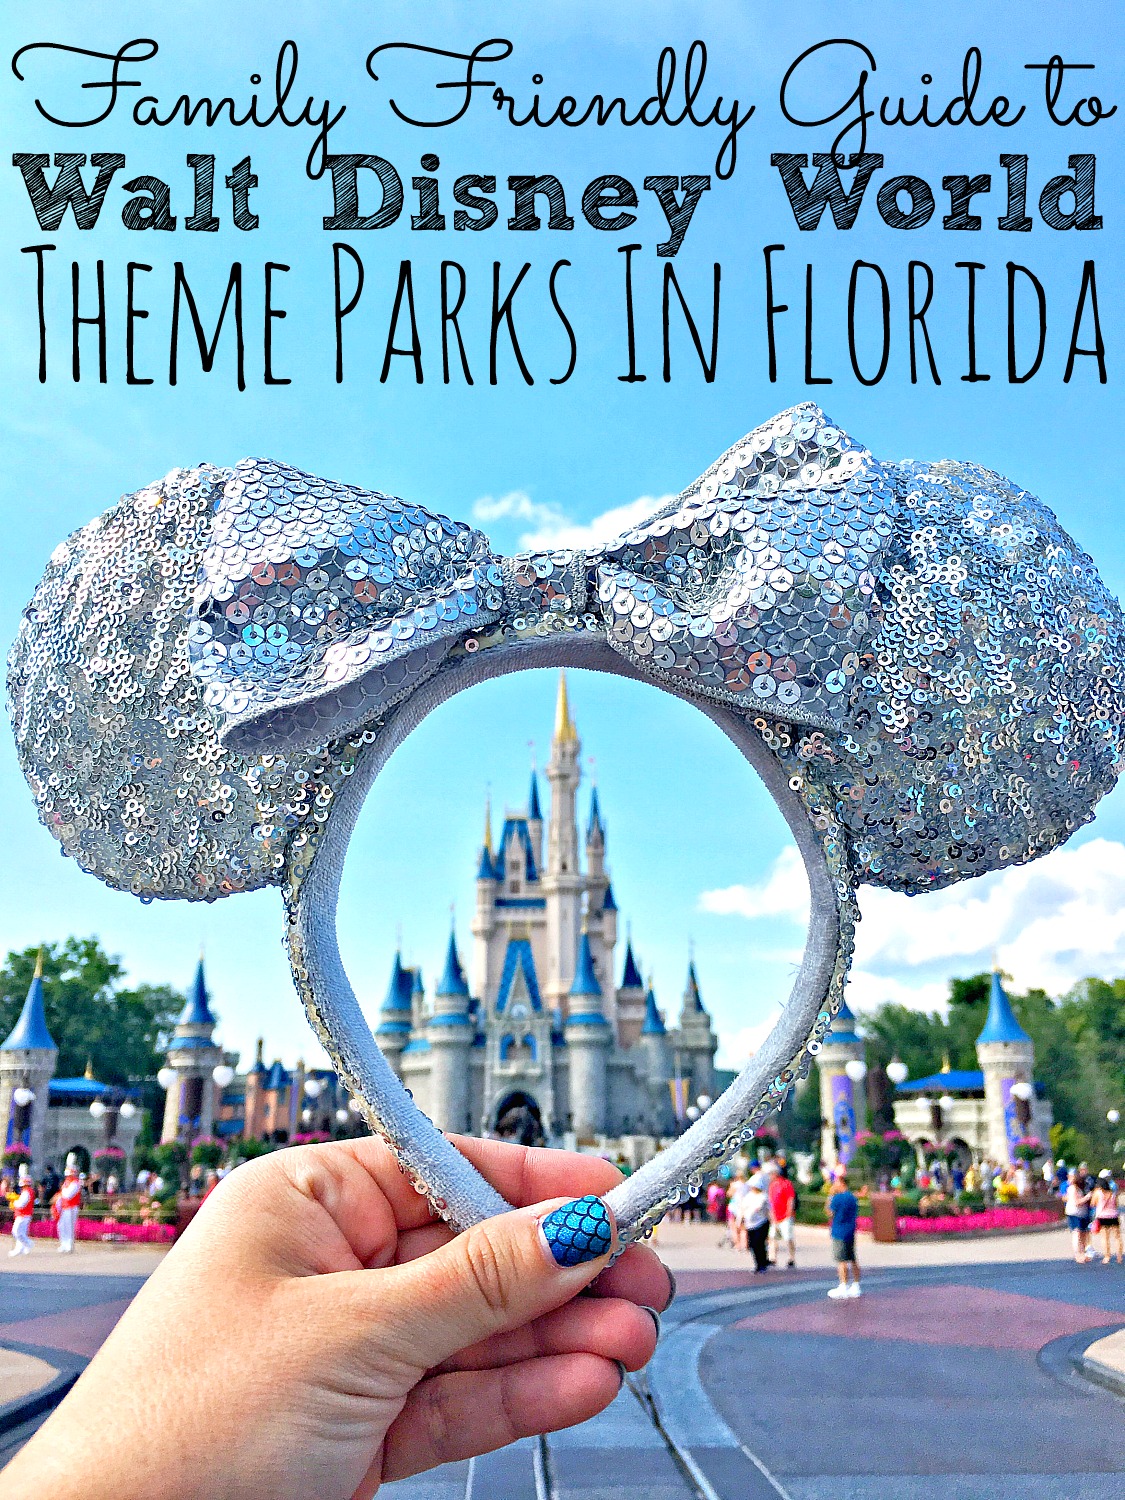 Family Friendly Guide To Walt Disney World Theme Parks in Florida